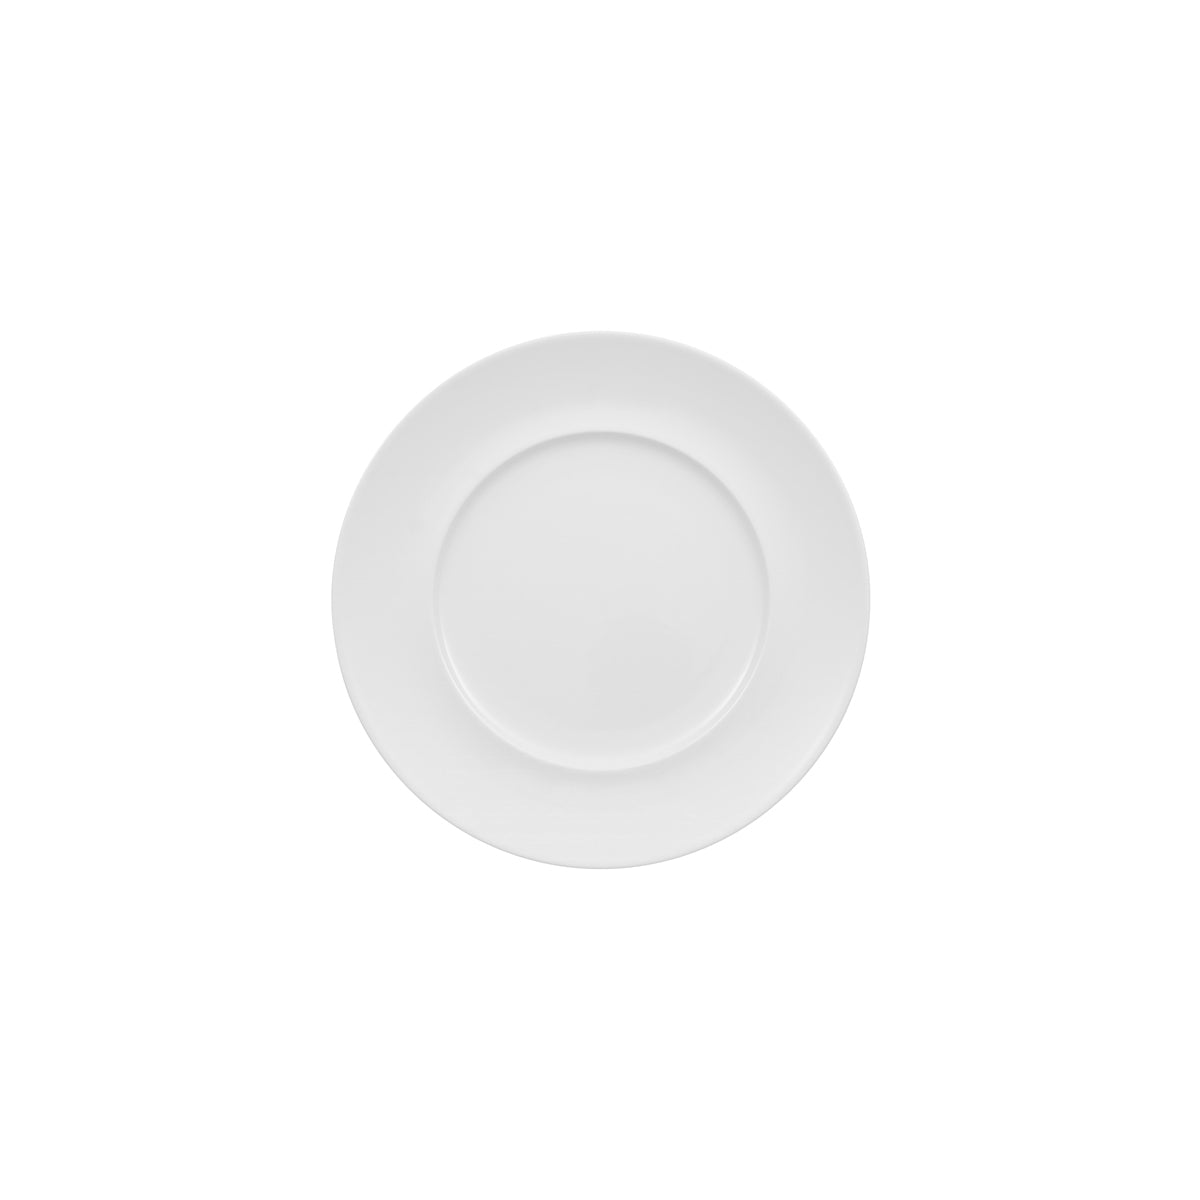 VB16-3272-2796 Villeroy And Boch Villeroy And Boch Stella Hotel White Plate Wide Rim 290mm / 180mm Tomkin Australia Hospitality Supplies